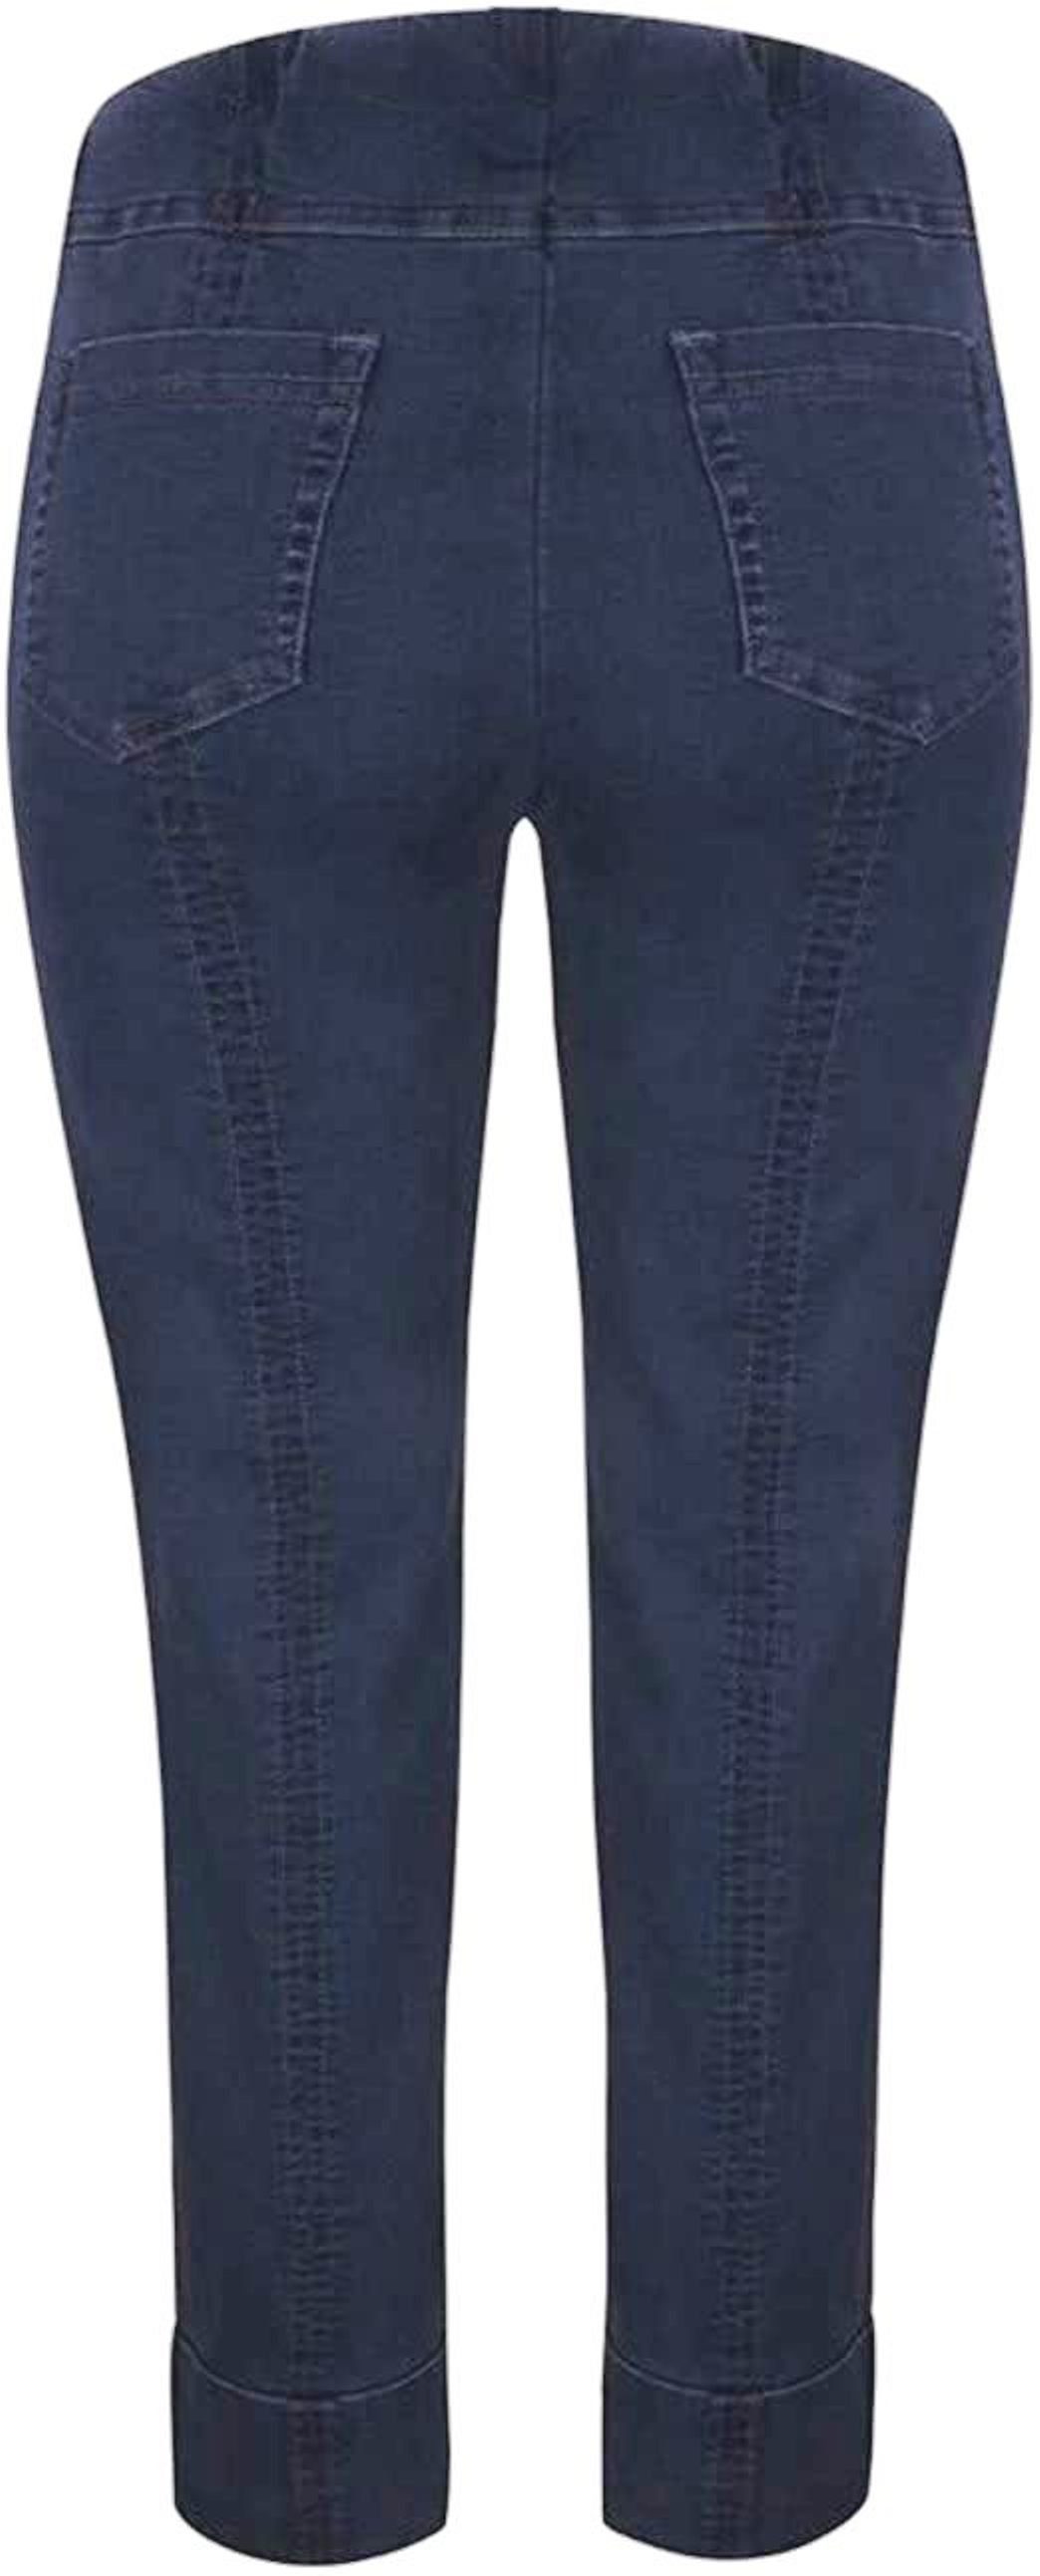 navy ROBELL Bella Stretchjeans 09 7/8-Jeans